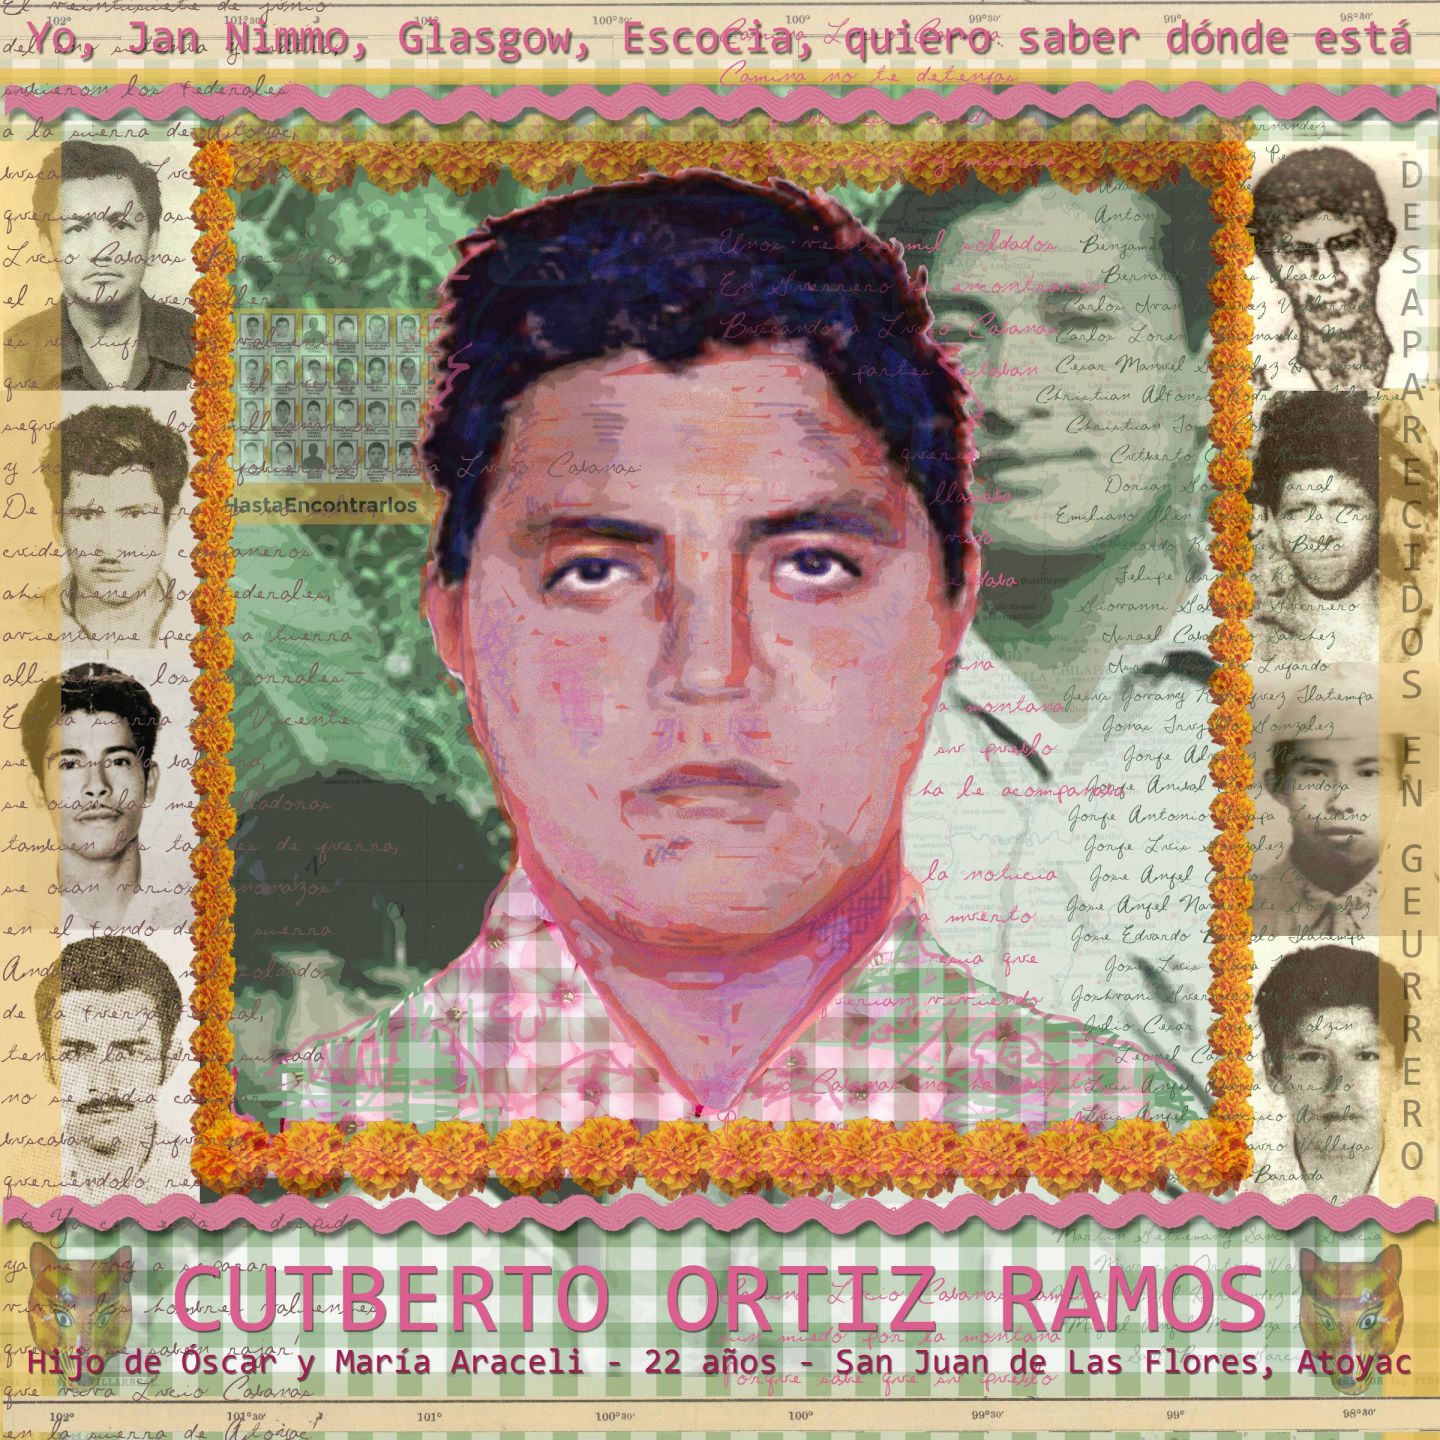 A tribute to Mexico's disappeared amidst demands for the truth 41